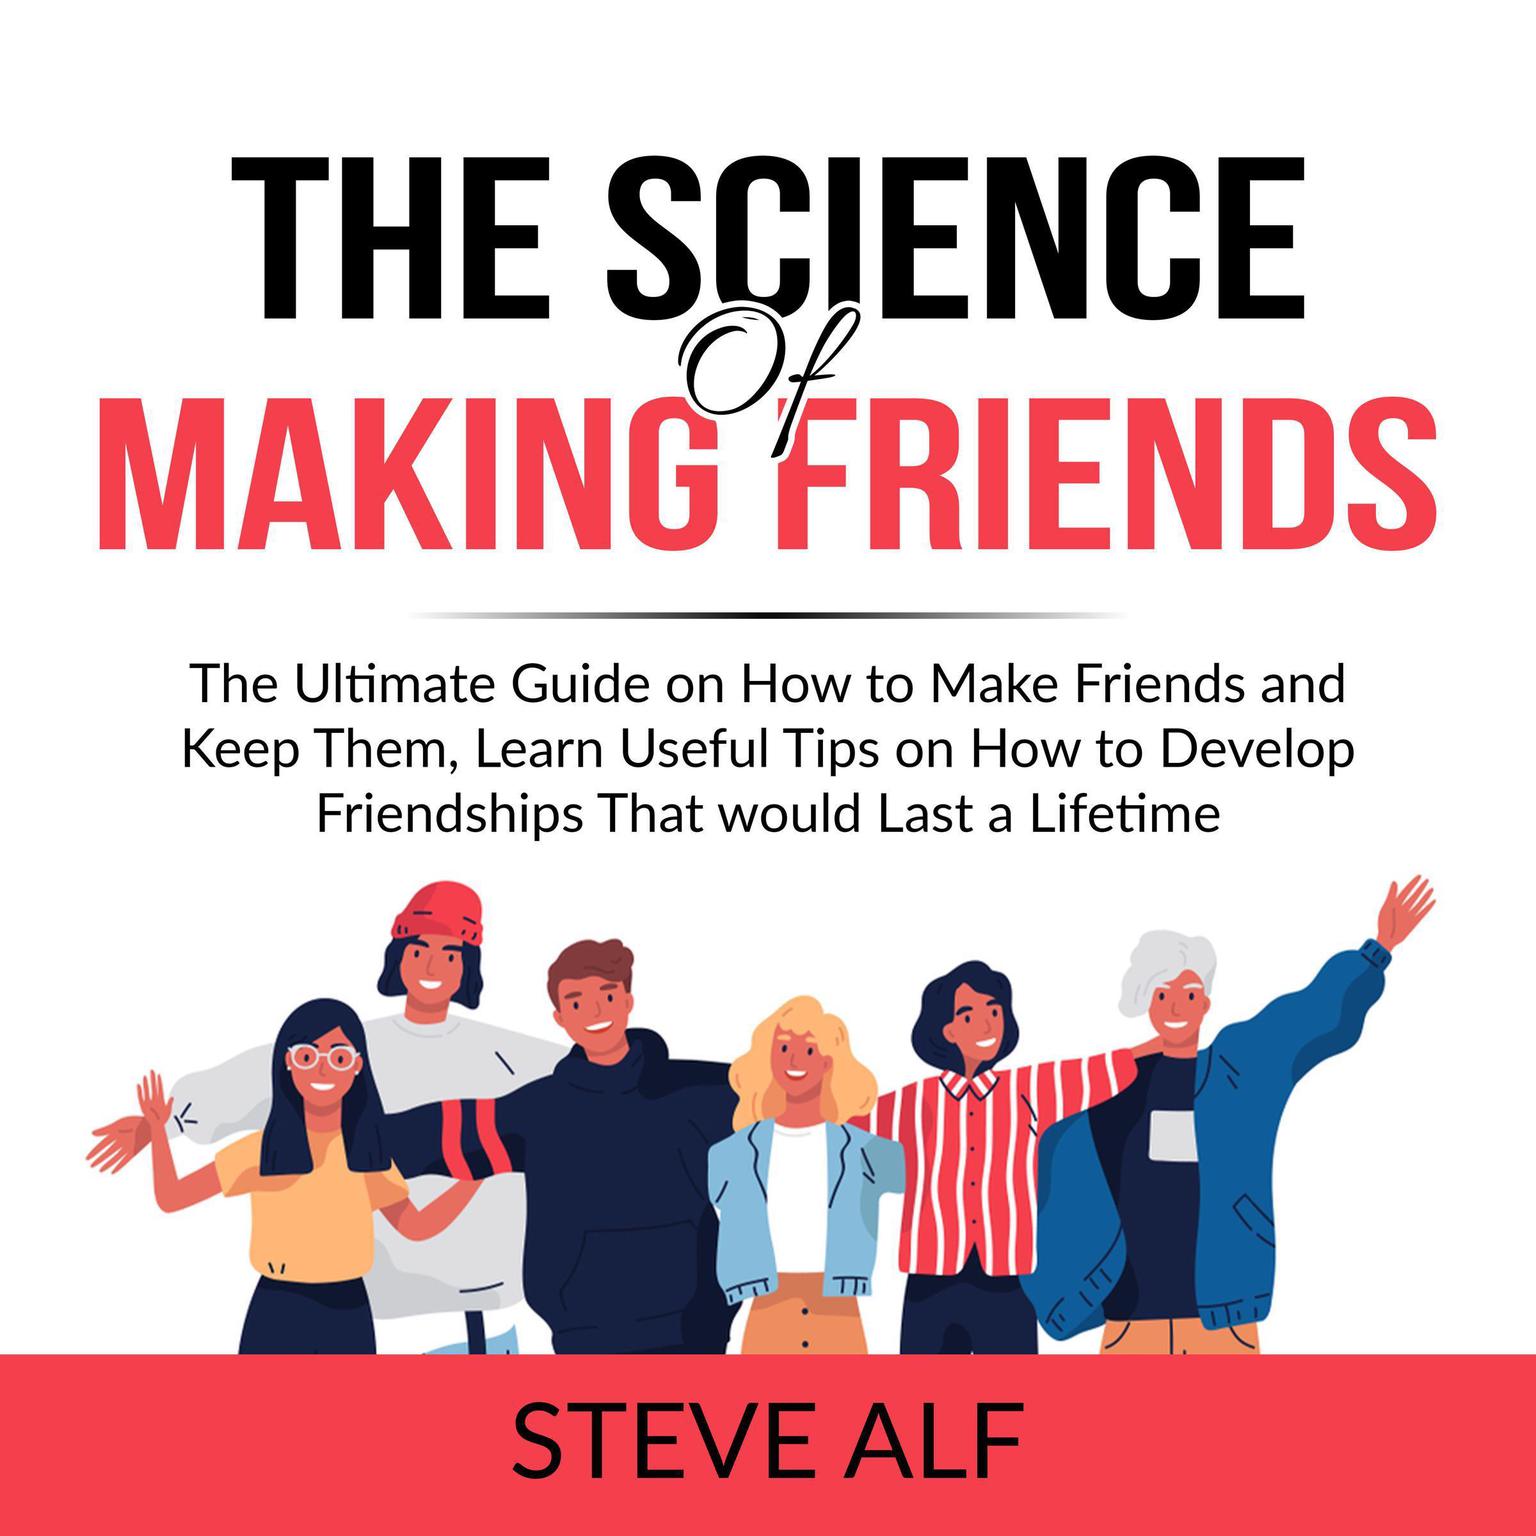 The Science of Making Friends: The Ultimate Guide on How to Make Friends and Keep Them, Learn Useful Tips on How to Develop Friendships That would Last a Lifetime  Audiobook, by Steve Alf